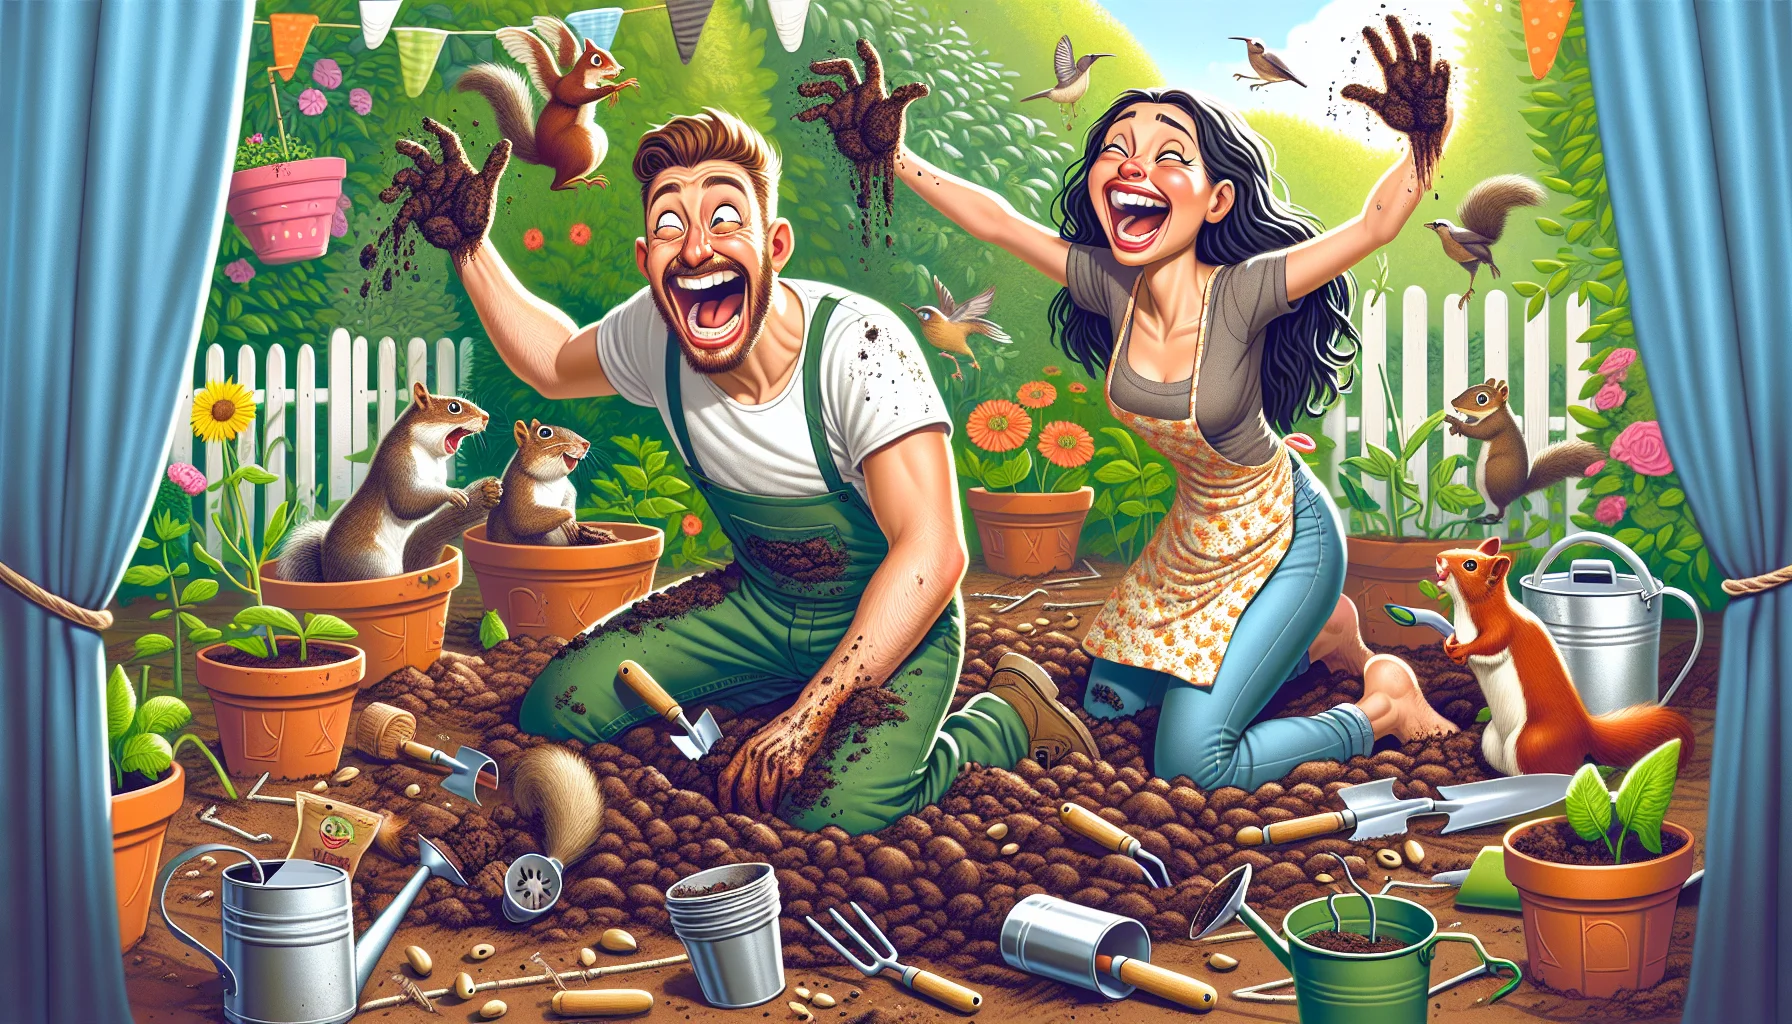 Create an amusing and engaging scene that showcases the joy of gardening. Picture a Caucasian man and a Middle-Eastern woman, both untidy but enthusiastic, surrounded by a mess of gardening tools, but laughing heartily. They're knee-deep in soil, struggling enthusiastically to plant snap peas into small starter pots. Around them, squirrels and birds are playfully digging and burying seeds in the ground, adding to the chaotic fun. This should be a sunny, lively garden scene, filled with humor and a touch of the absurd to make planting snap peas an enticing activity.